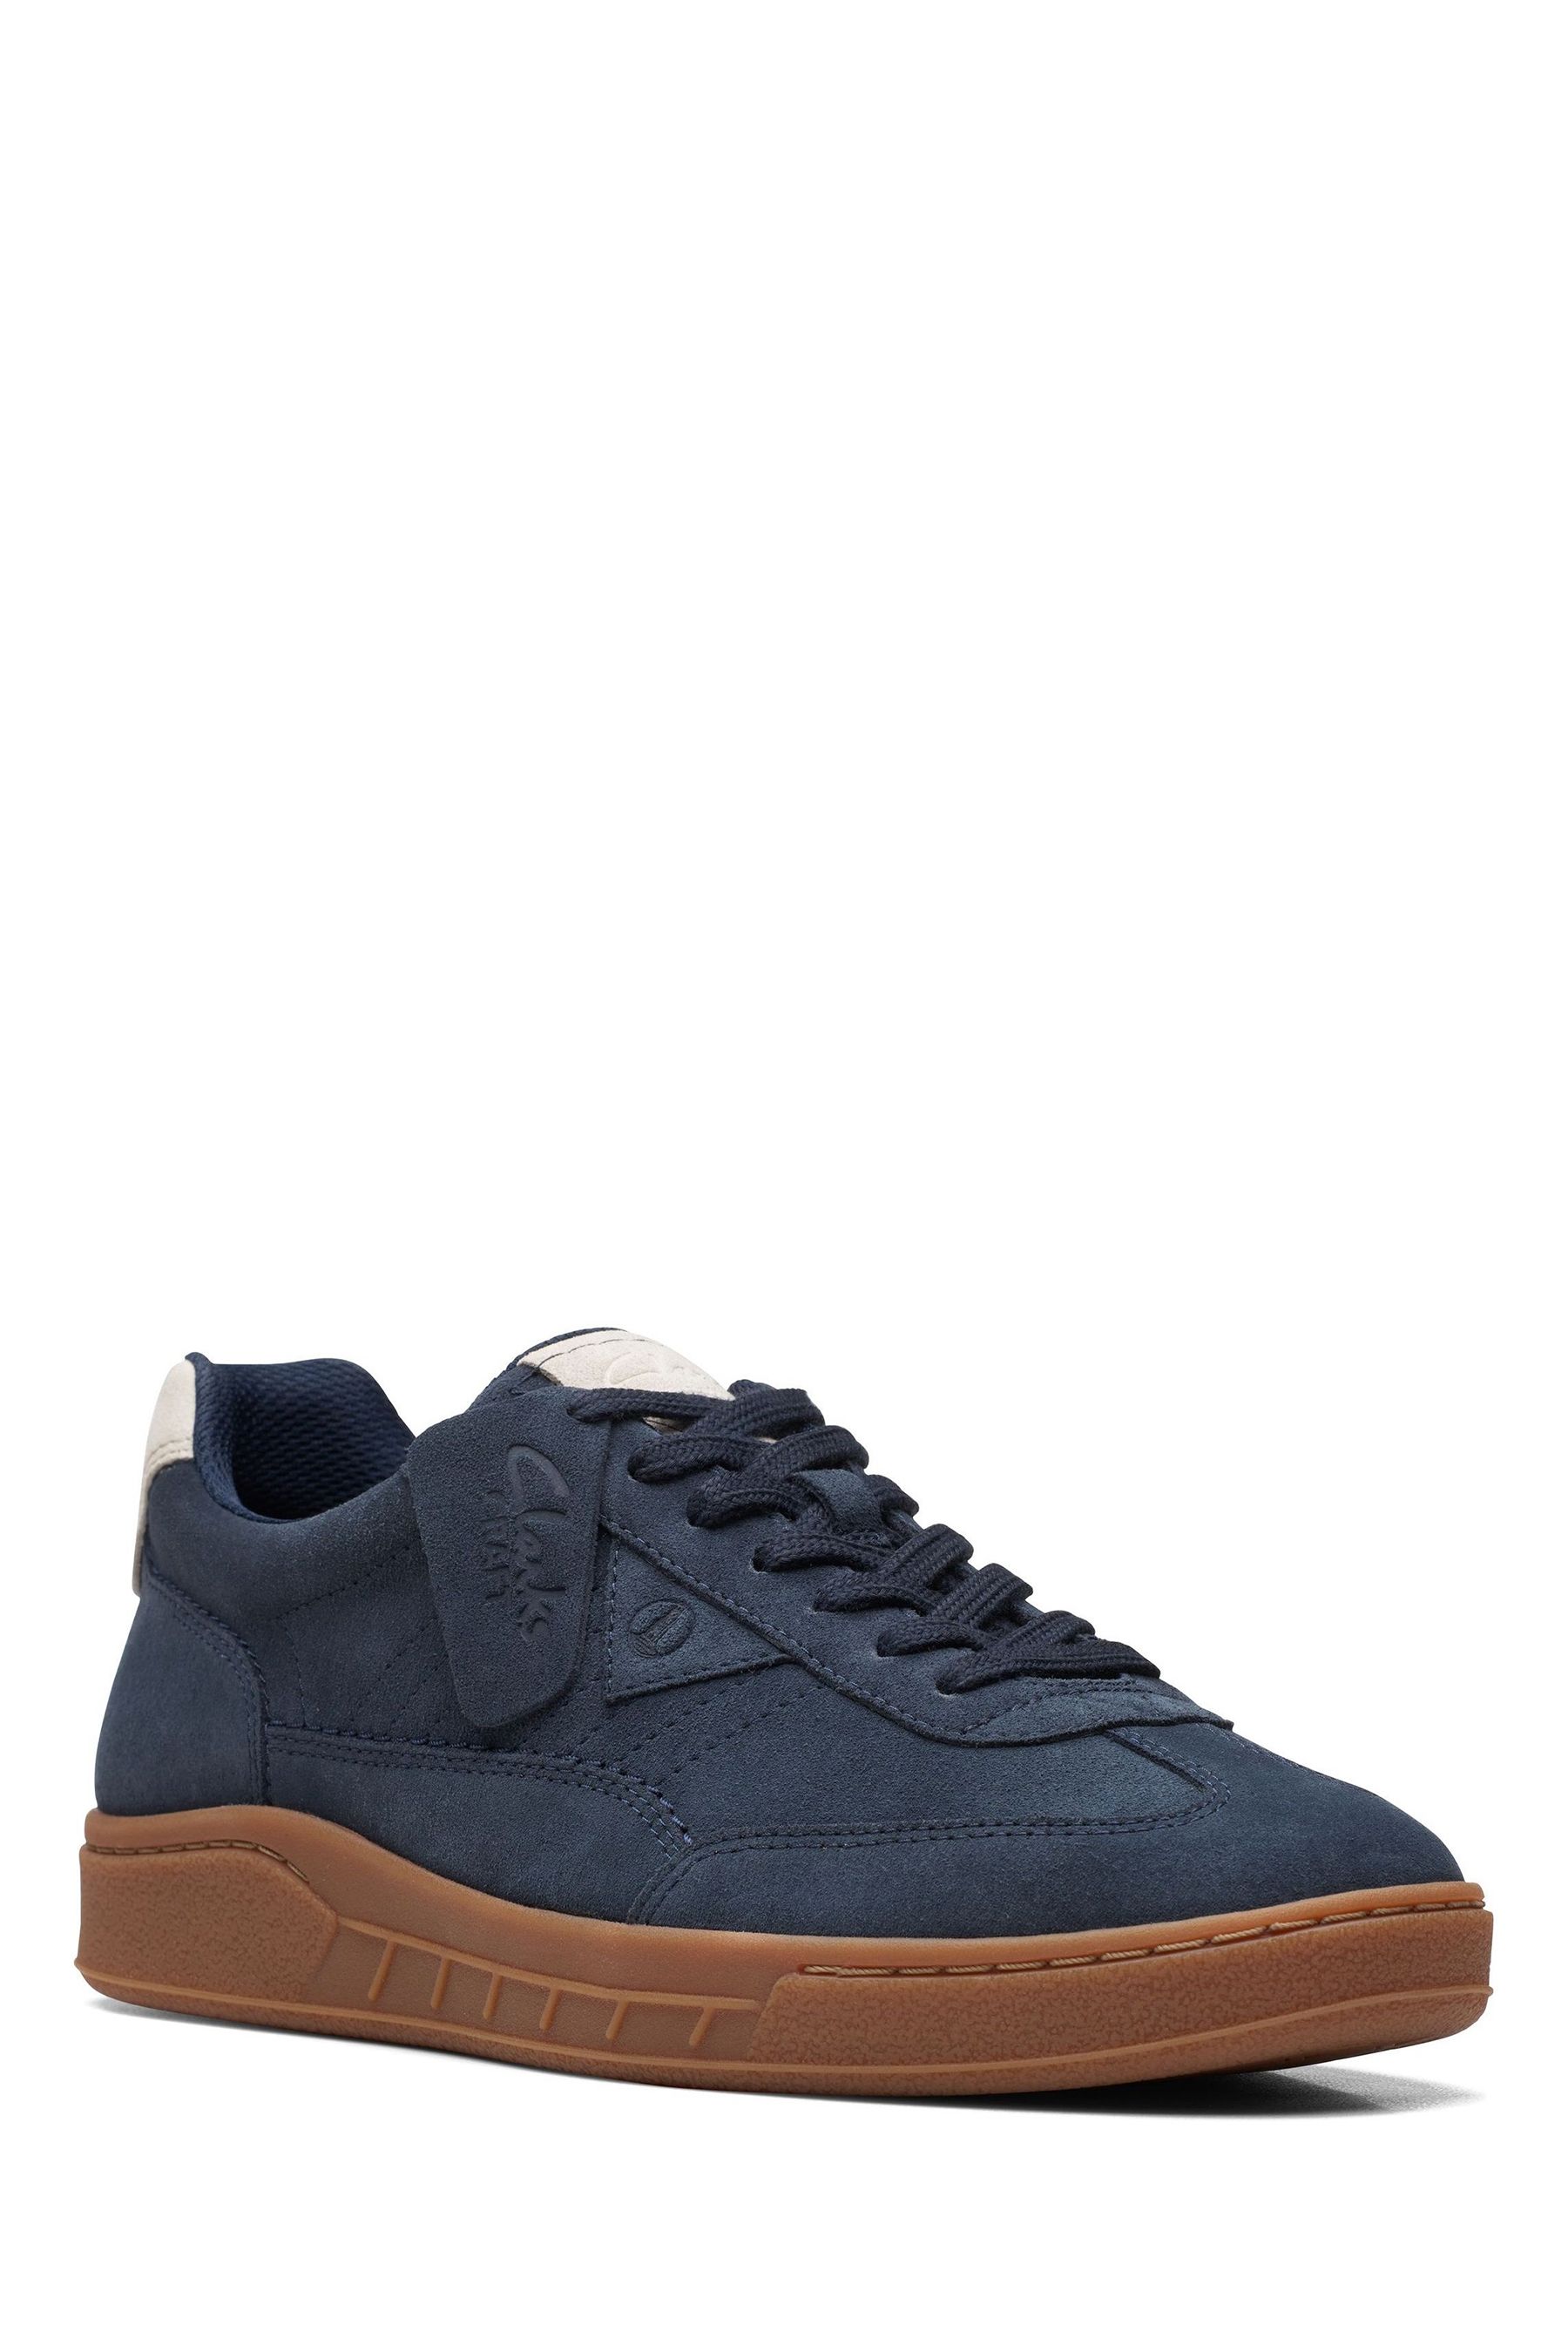 Buy Clarks Blue Combi Craft Rally Ace Trainers from the Next UK online shop